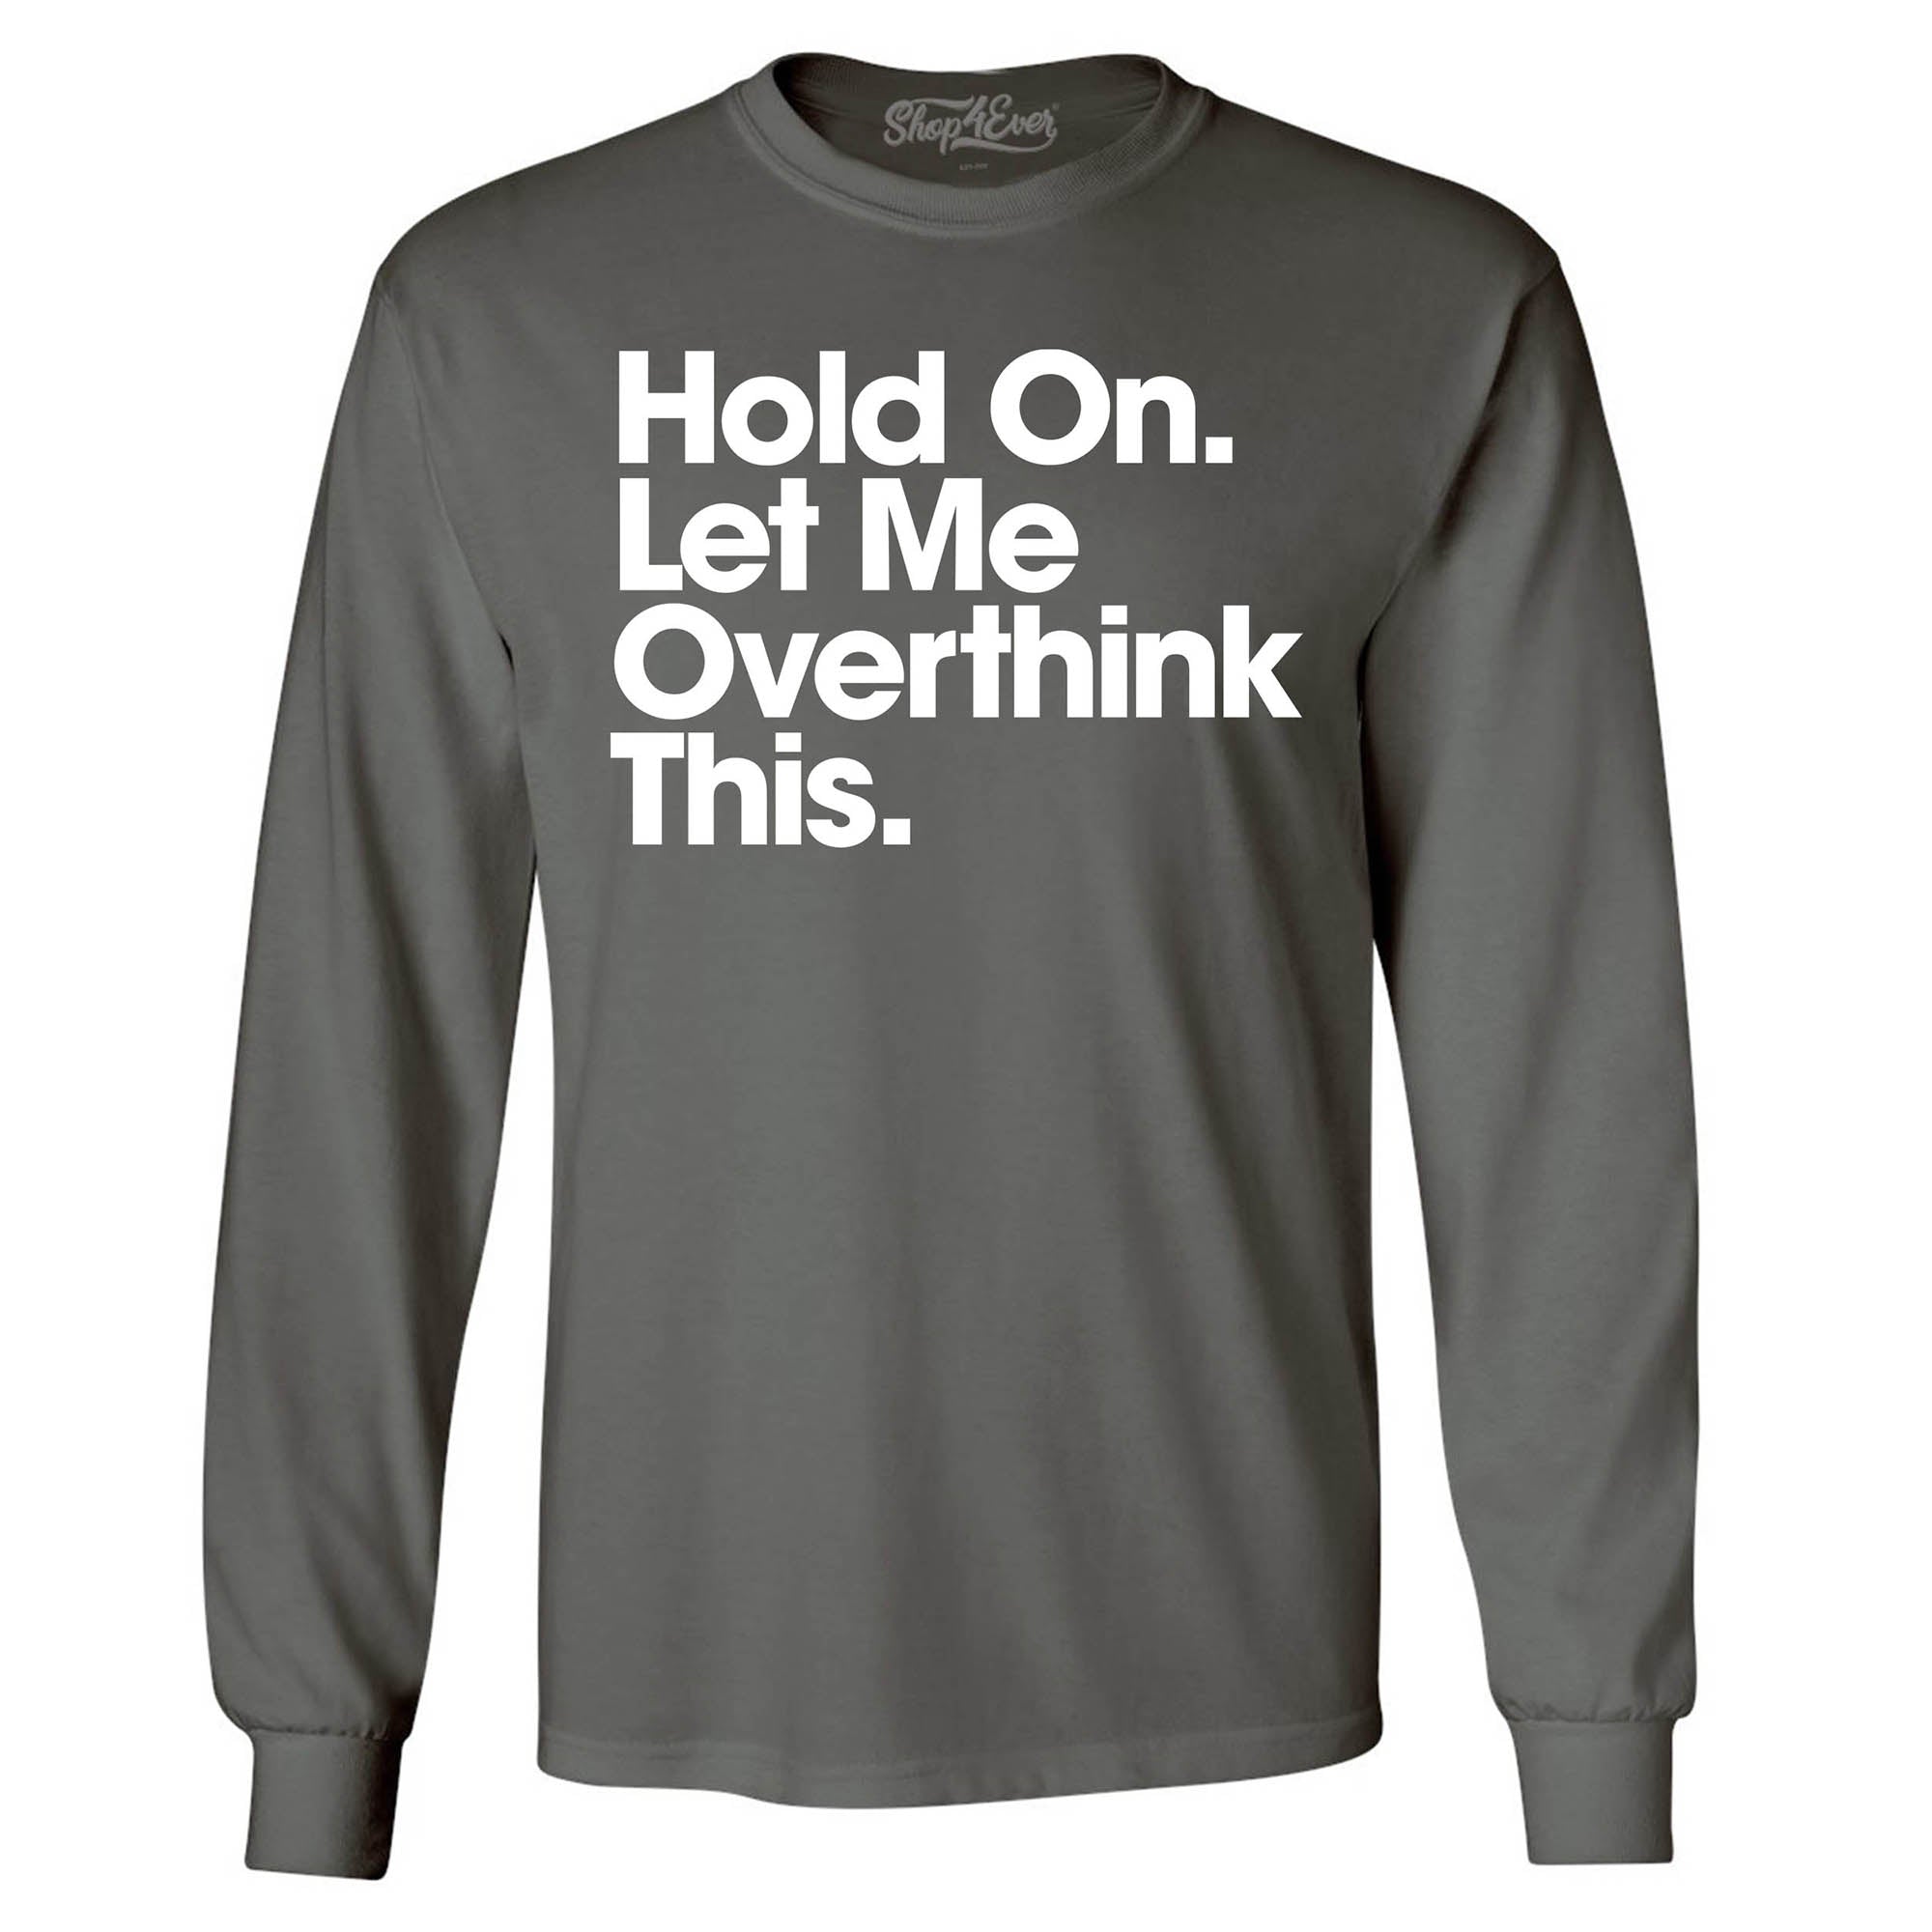 Hold On. Let Me Overthink This. Long Sleeve Shirt